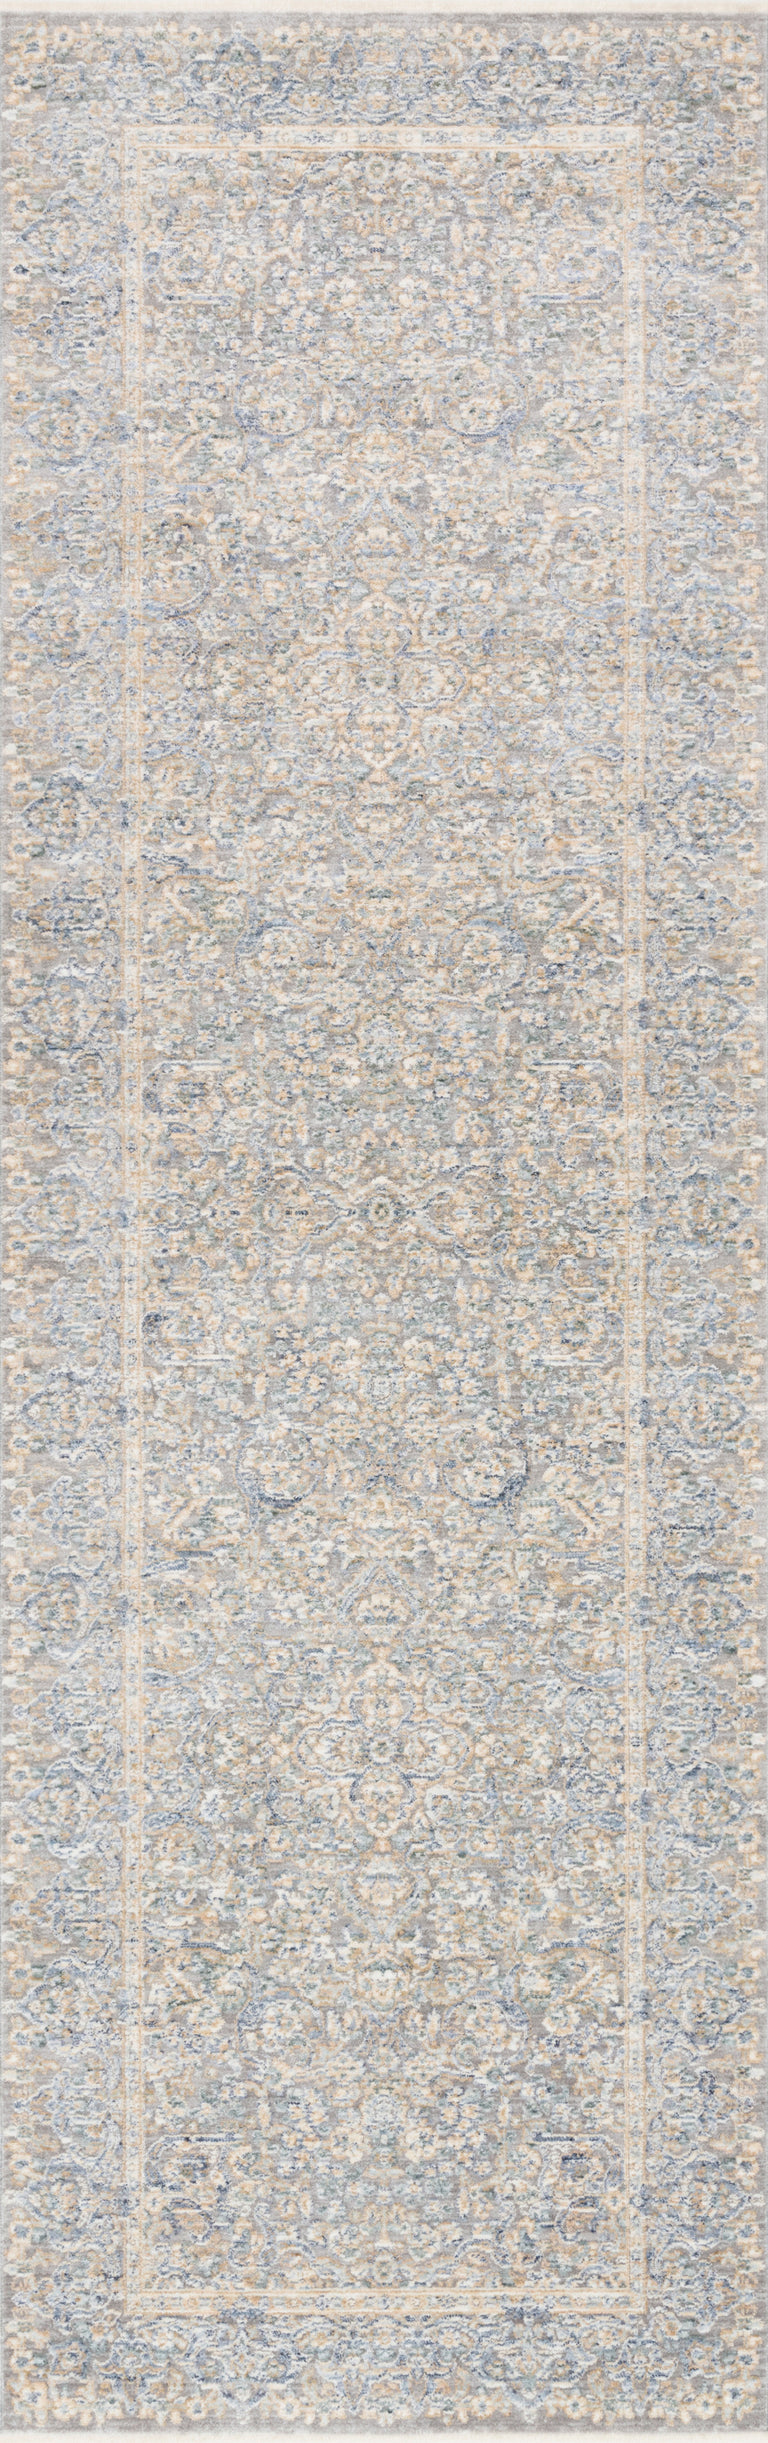 Loloi Rugs Pandora Collection Rug in Stone, Gold - 11'6" x 15'6"